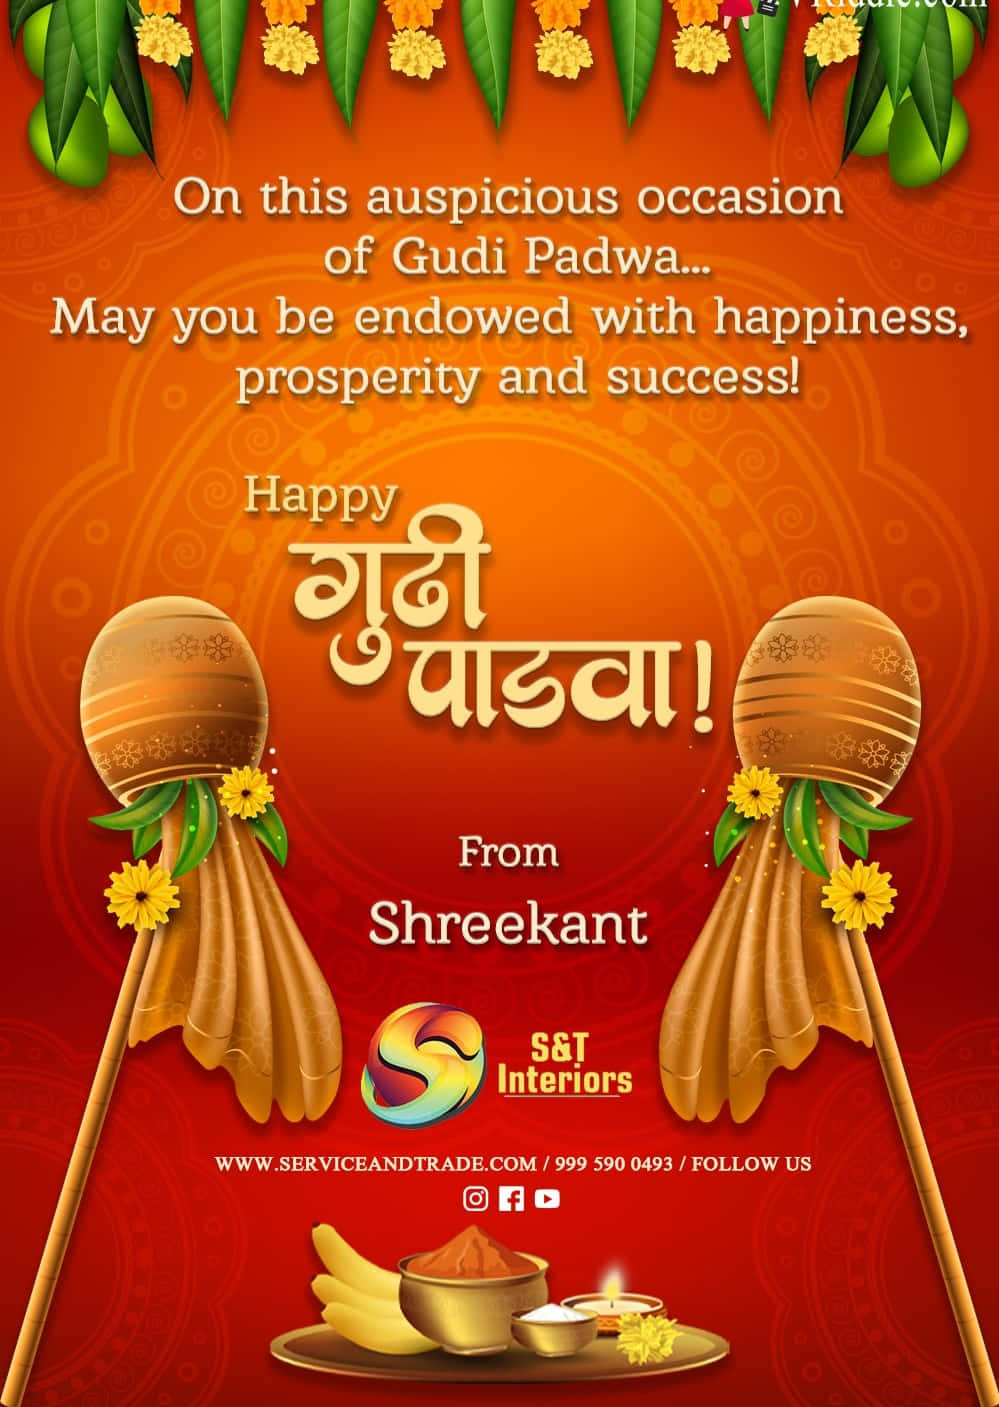 Celebrate the start of the New Year with Gudi Padwa